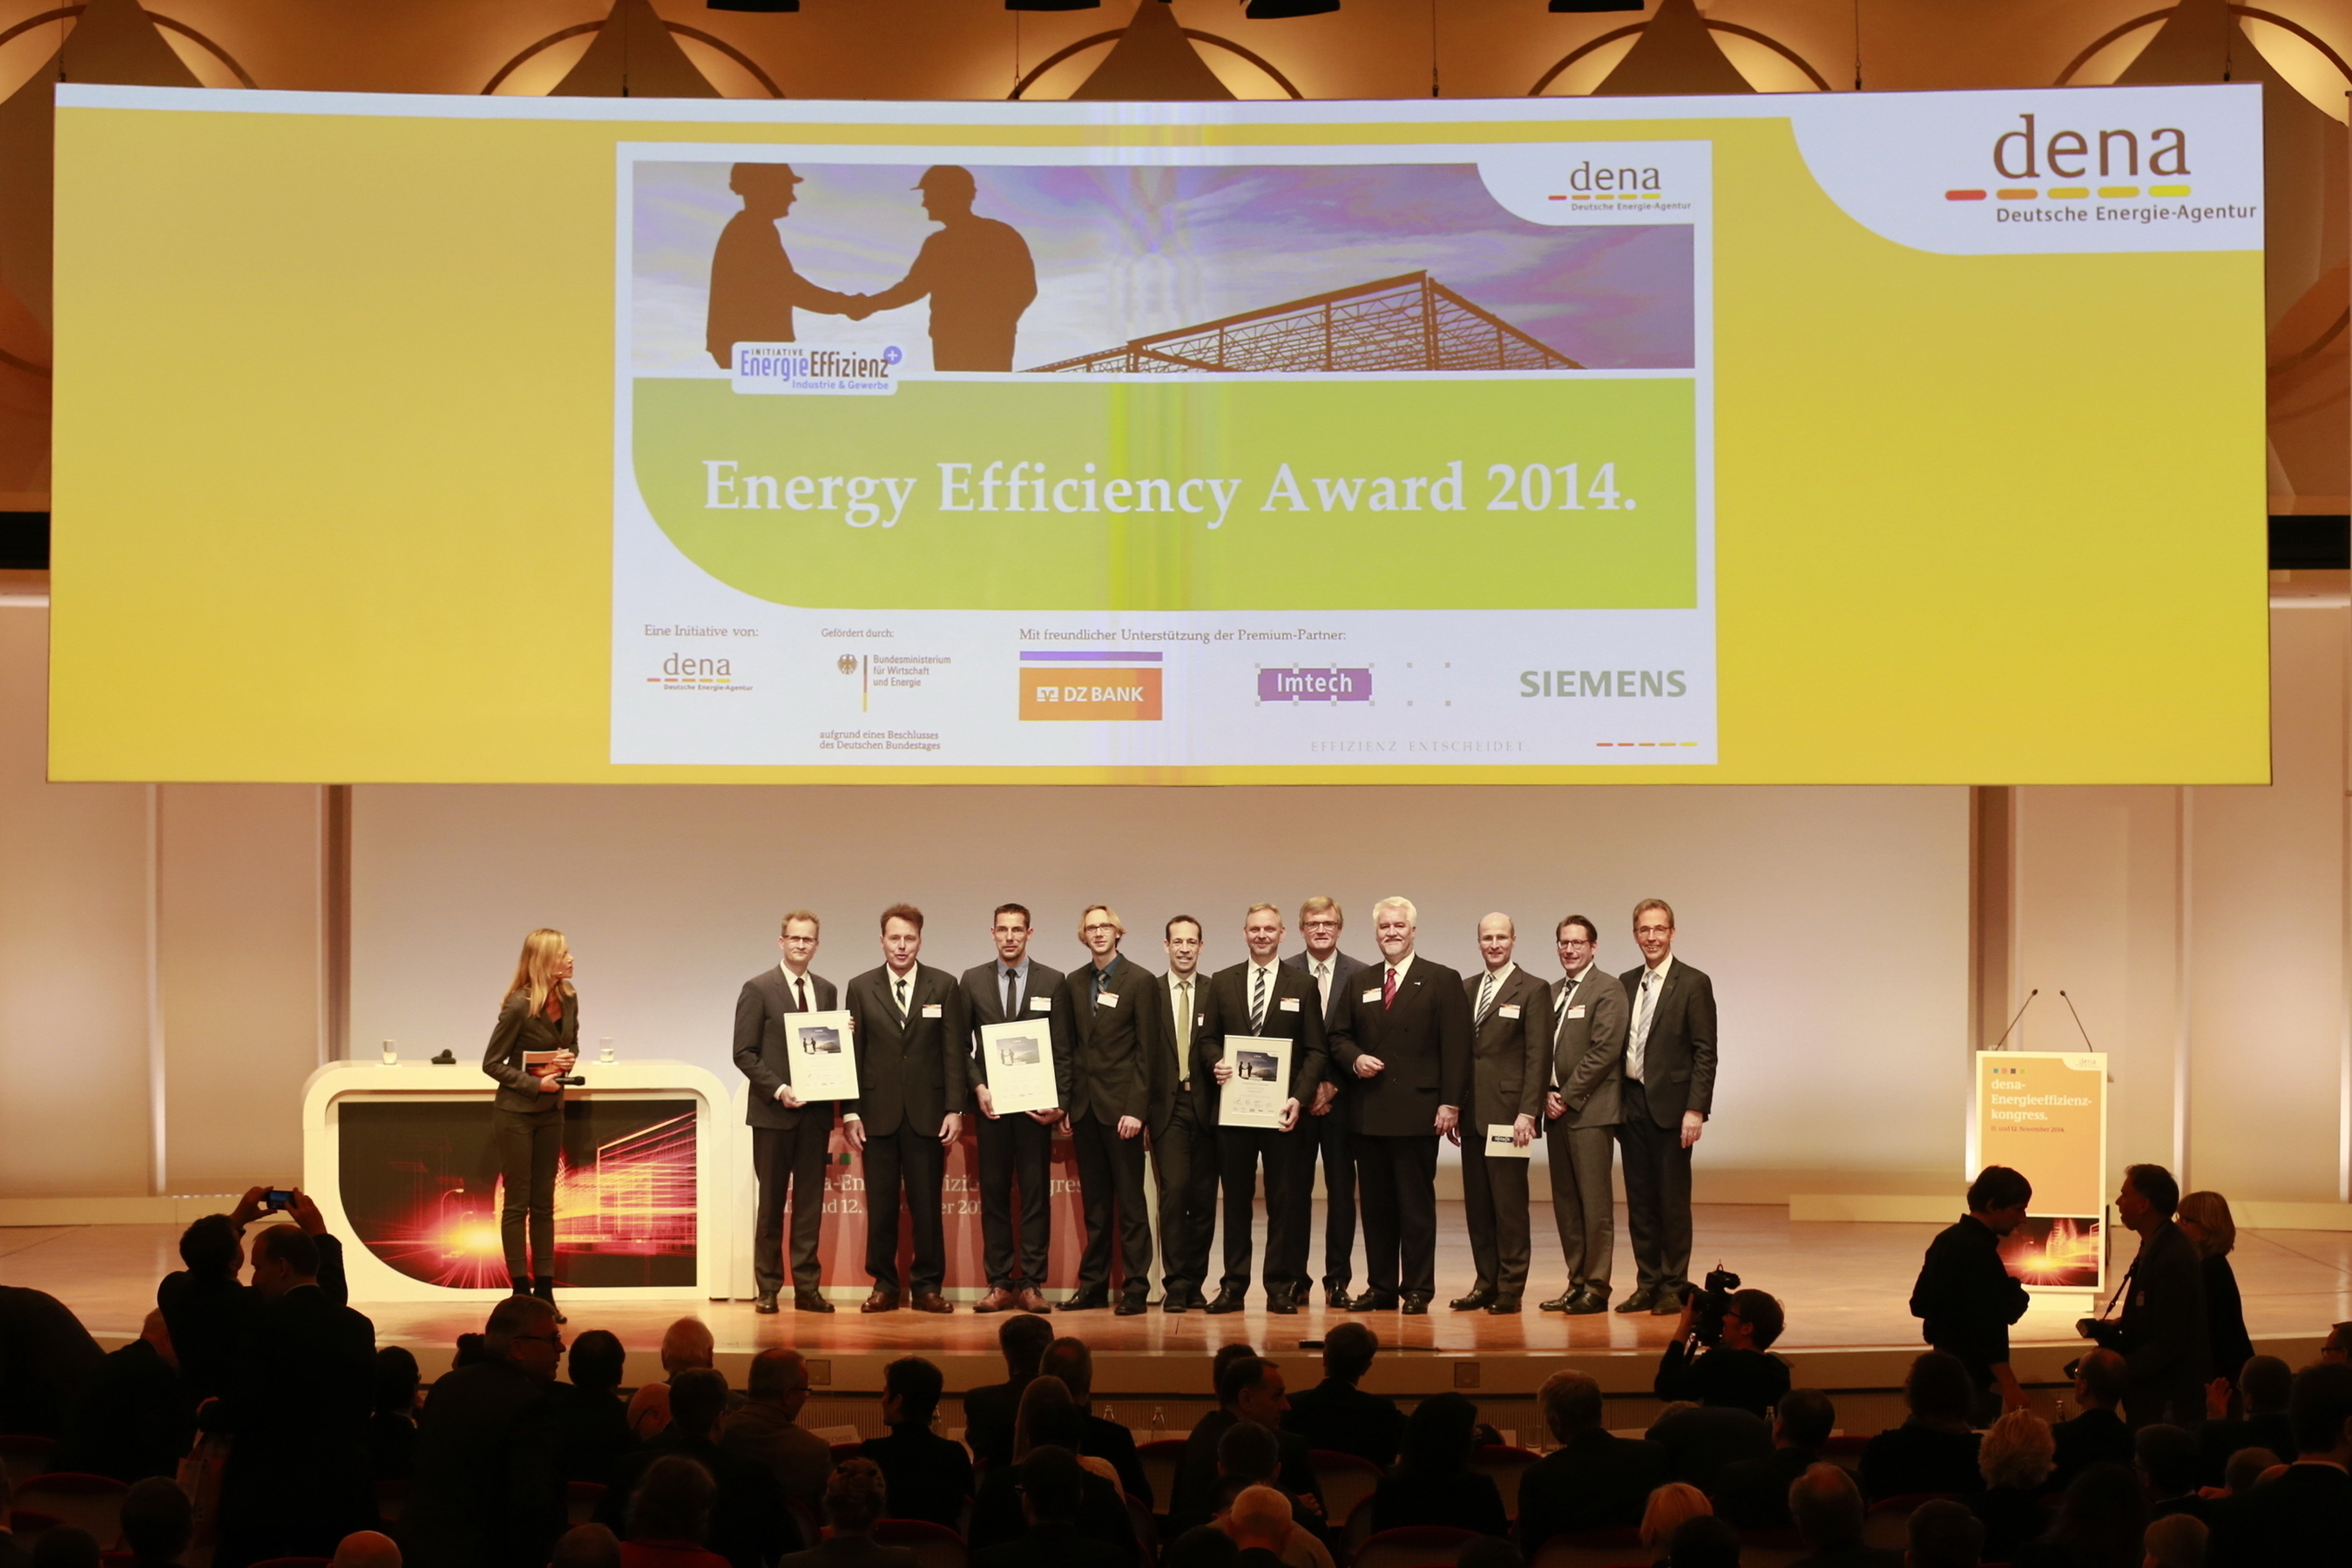 The winners of the Energy Efficiency Award 2014, representatives of the Premium Partners and the Chairman of the Board of the Deutsche Energie-Agentur (dena) Stephan Kohler (right) and presenter Nina Ruge (left) on the dena Energy Efficiency Congress in Berlin. (PRNewsFoto/dena)